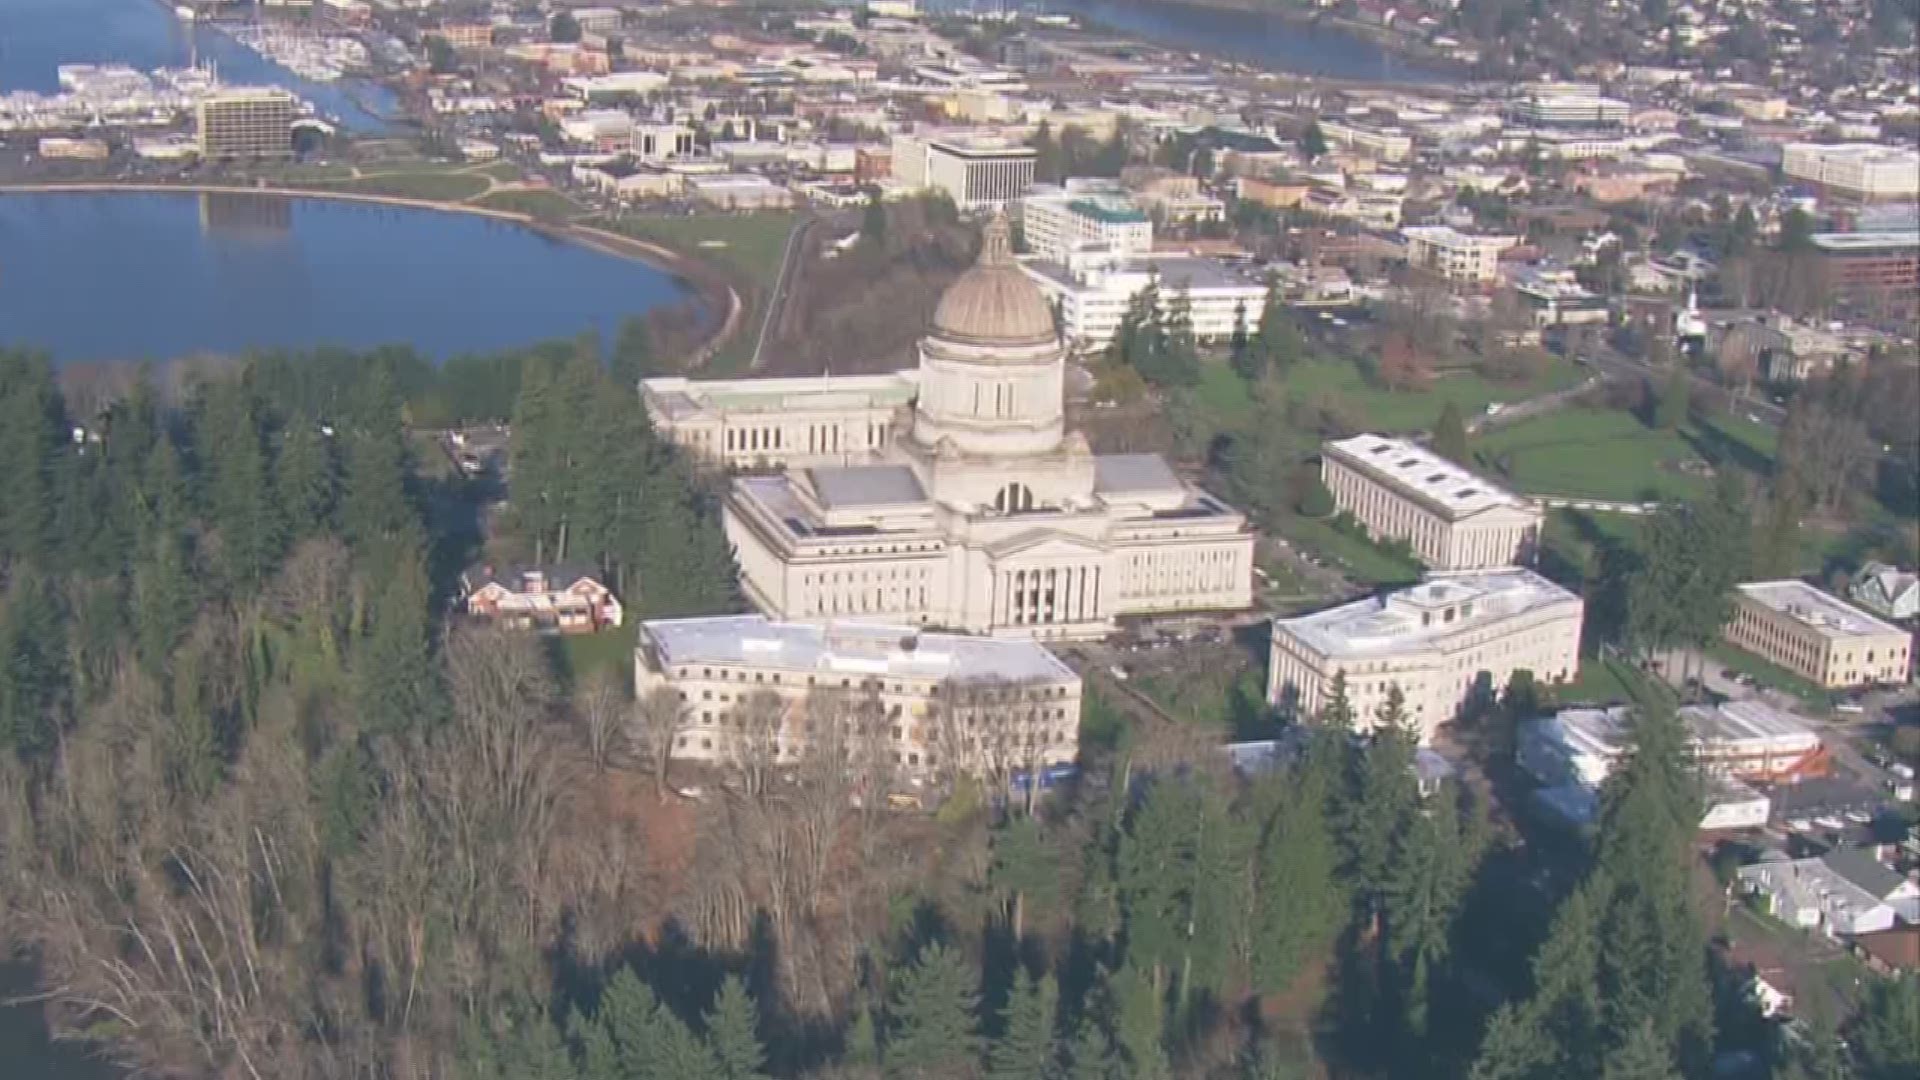 One proposal in Olympia would allow children to consume pot on campus for medical purposes.